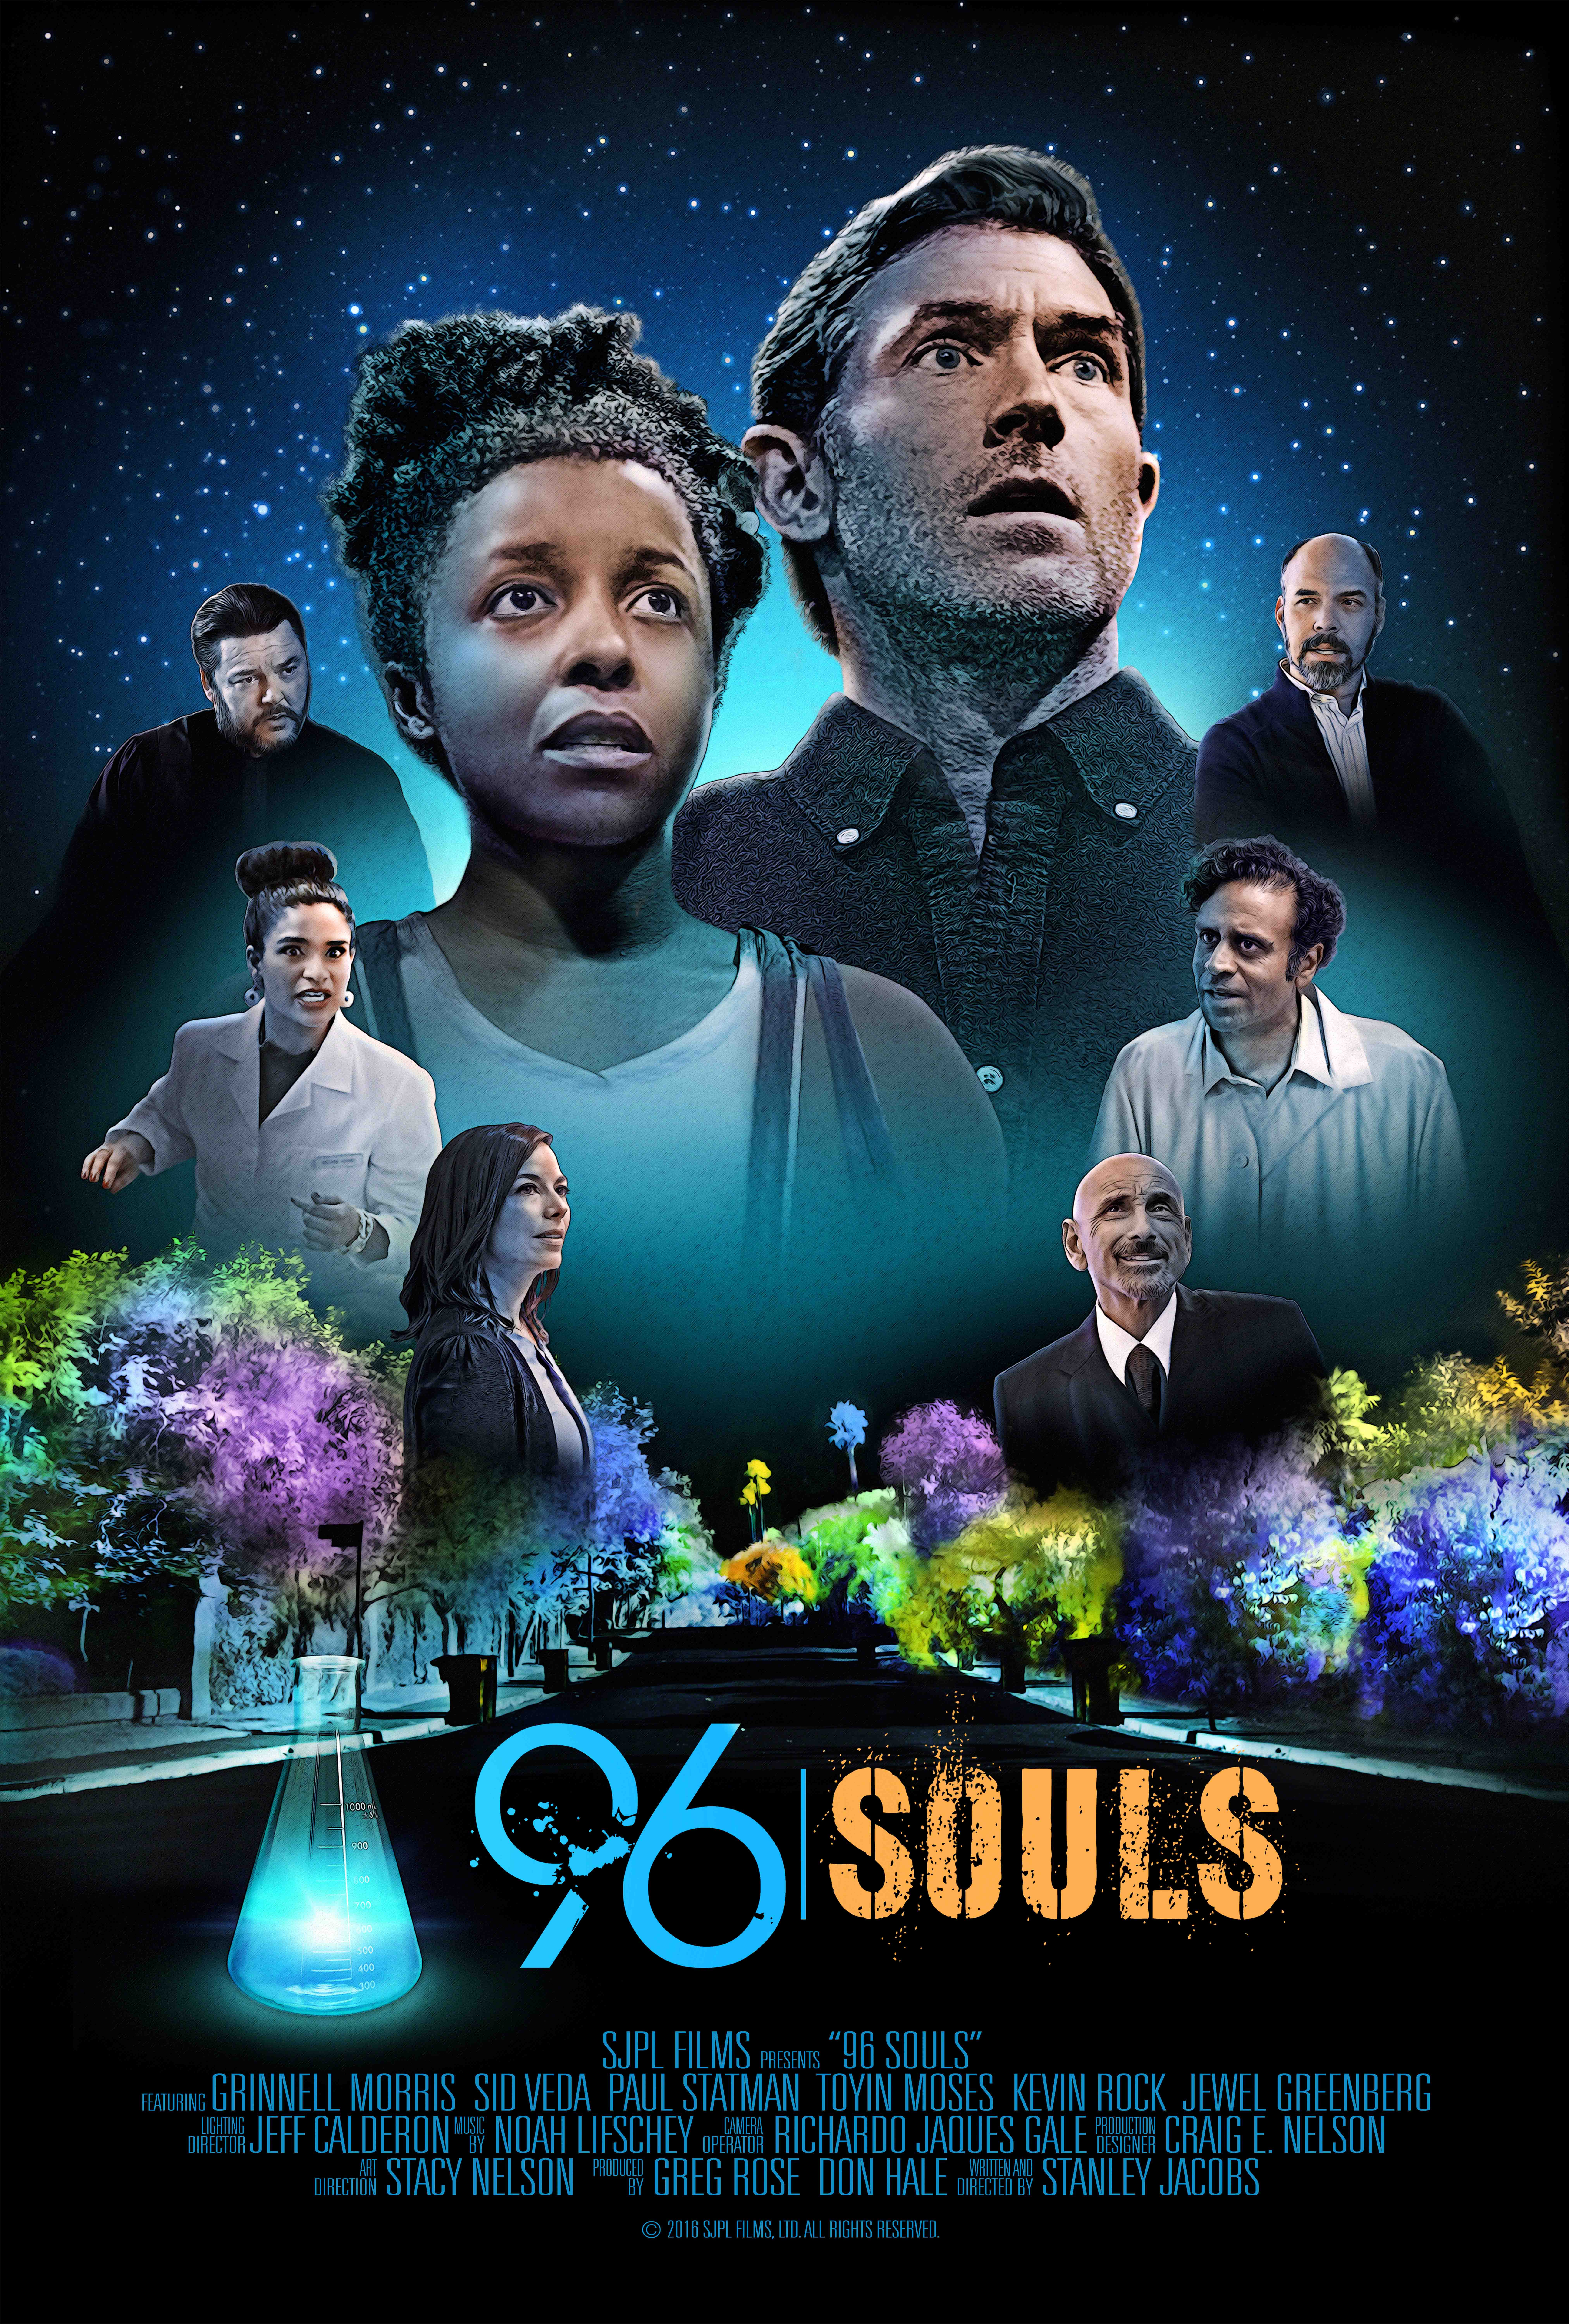 96 Souls - (2016 movie) poster